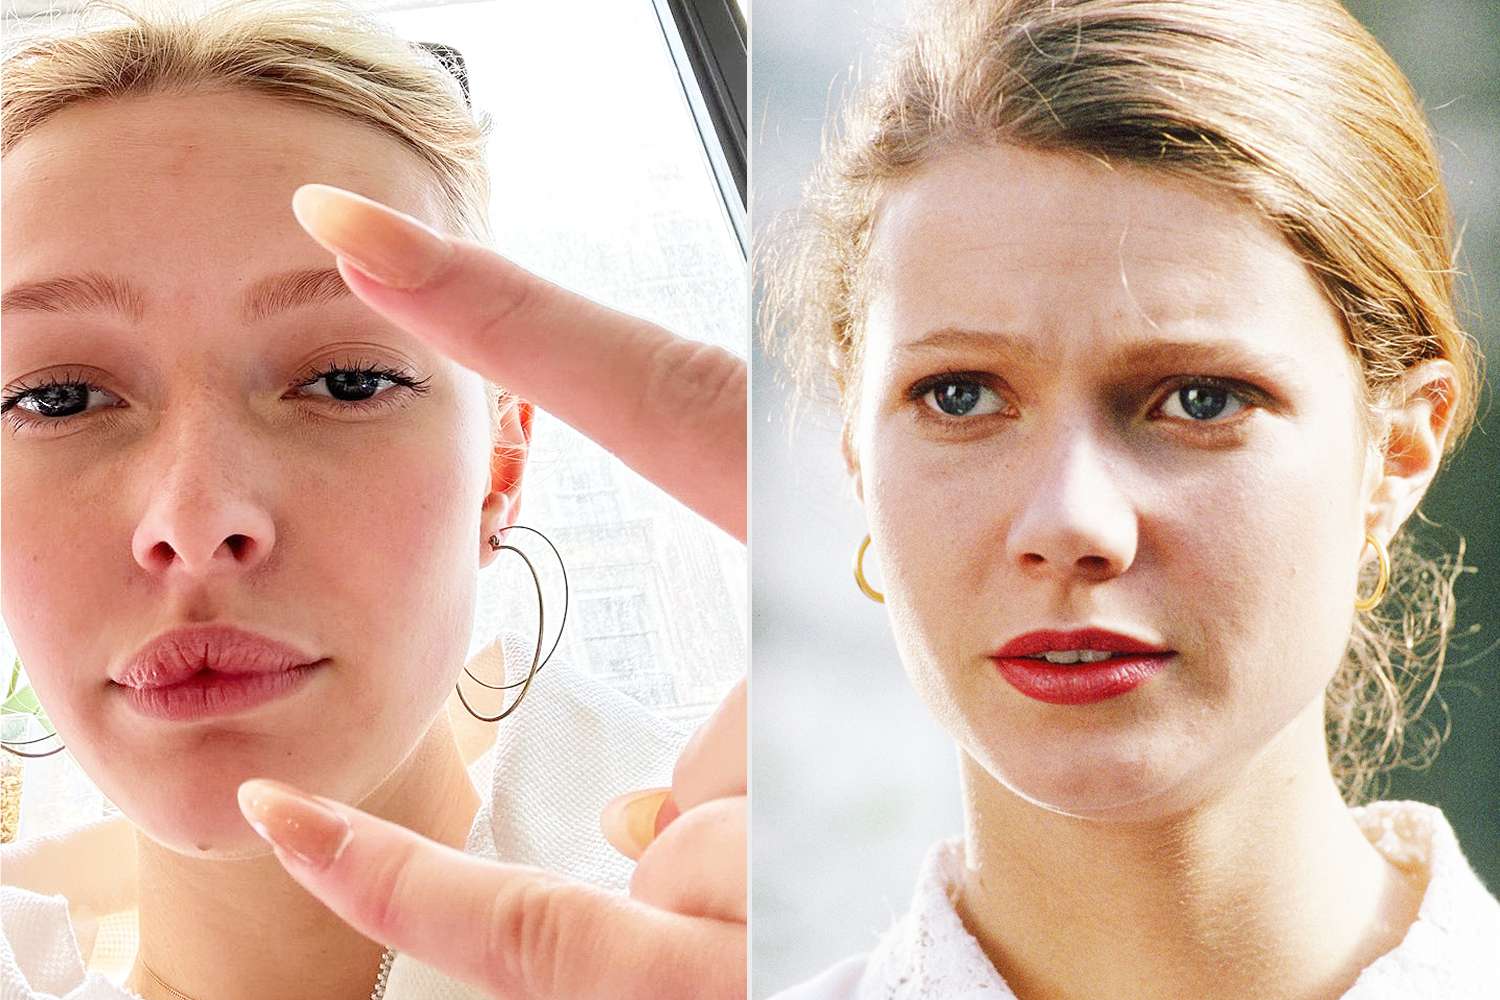 Apple Martin Is Mom Gwyneth Paltrow's Twin in Rare Birthday Selfie: See Them Both at Age 20